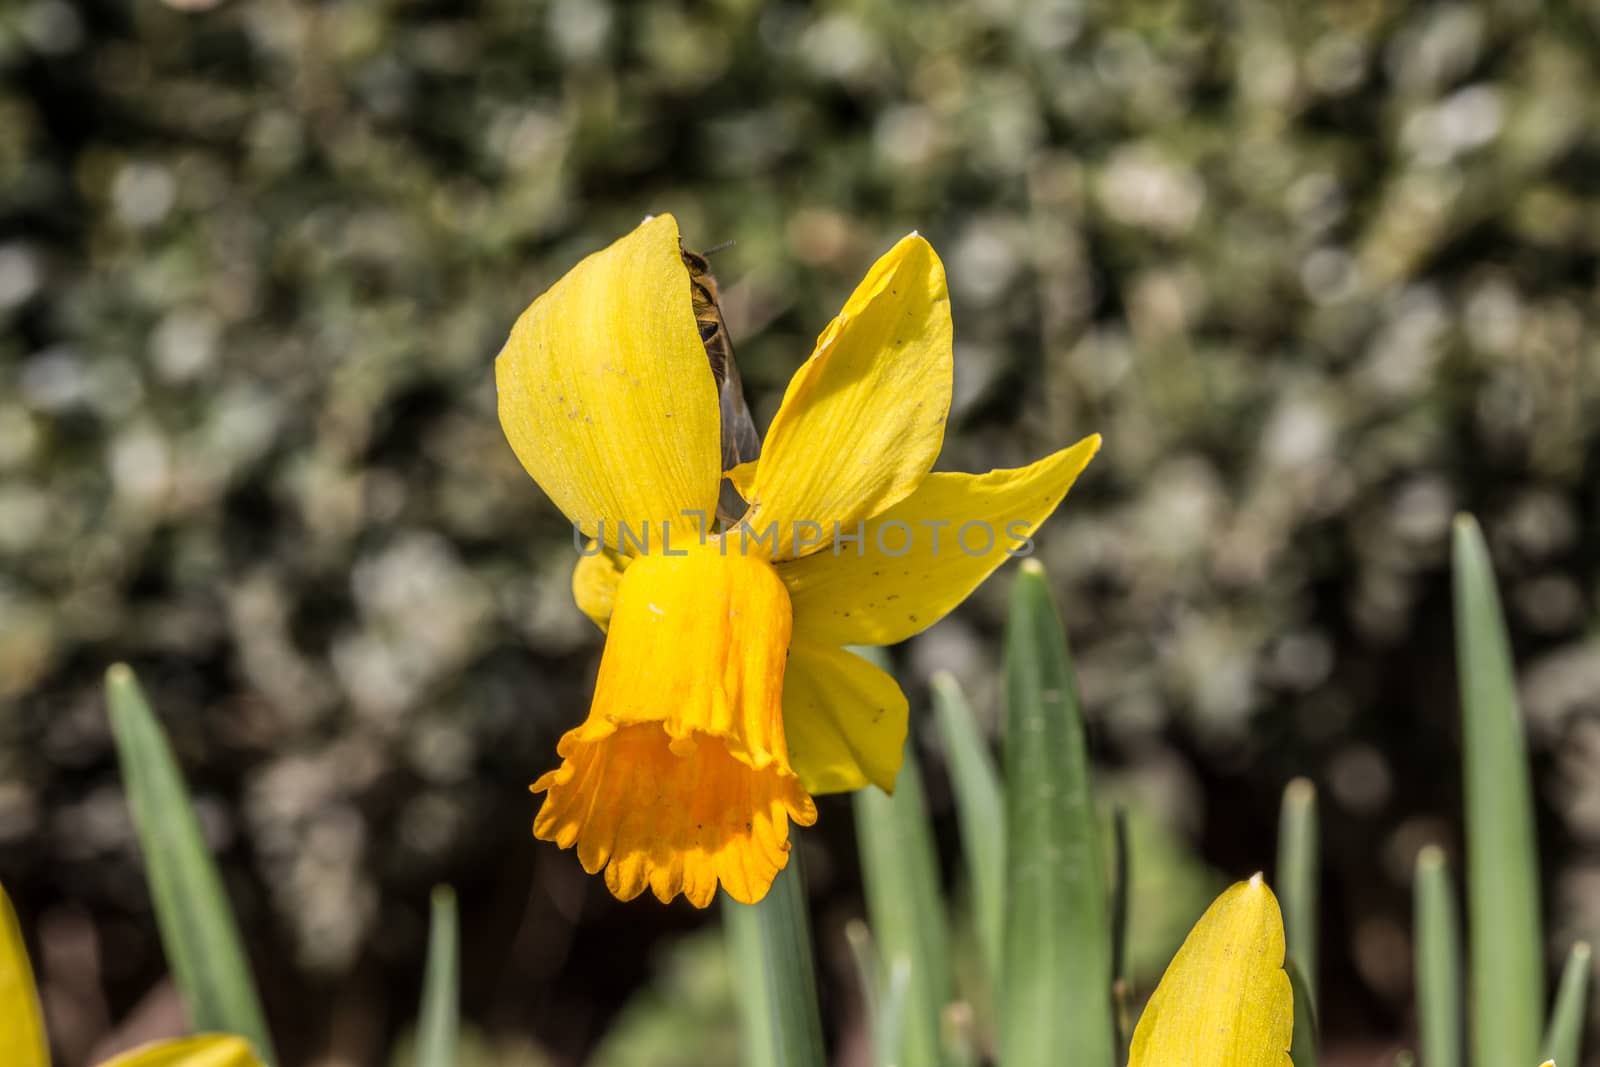 yellow daffodils or daffodils in spring by Dr-Lange